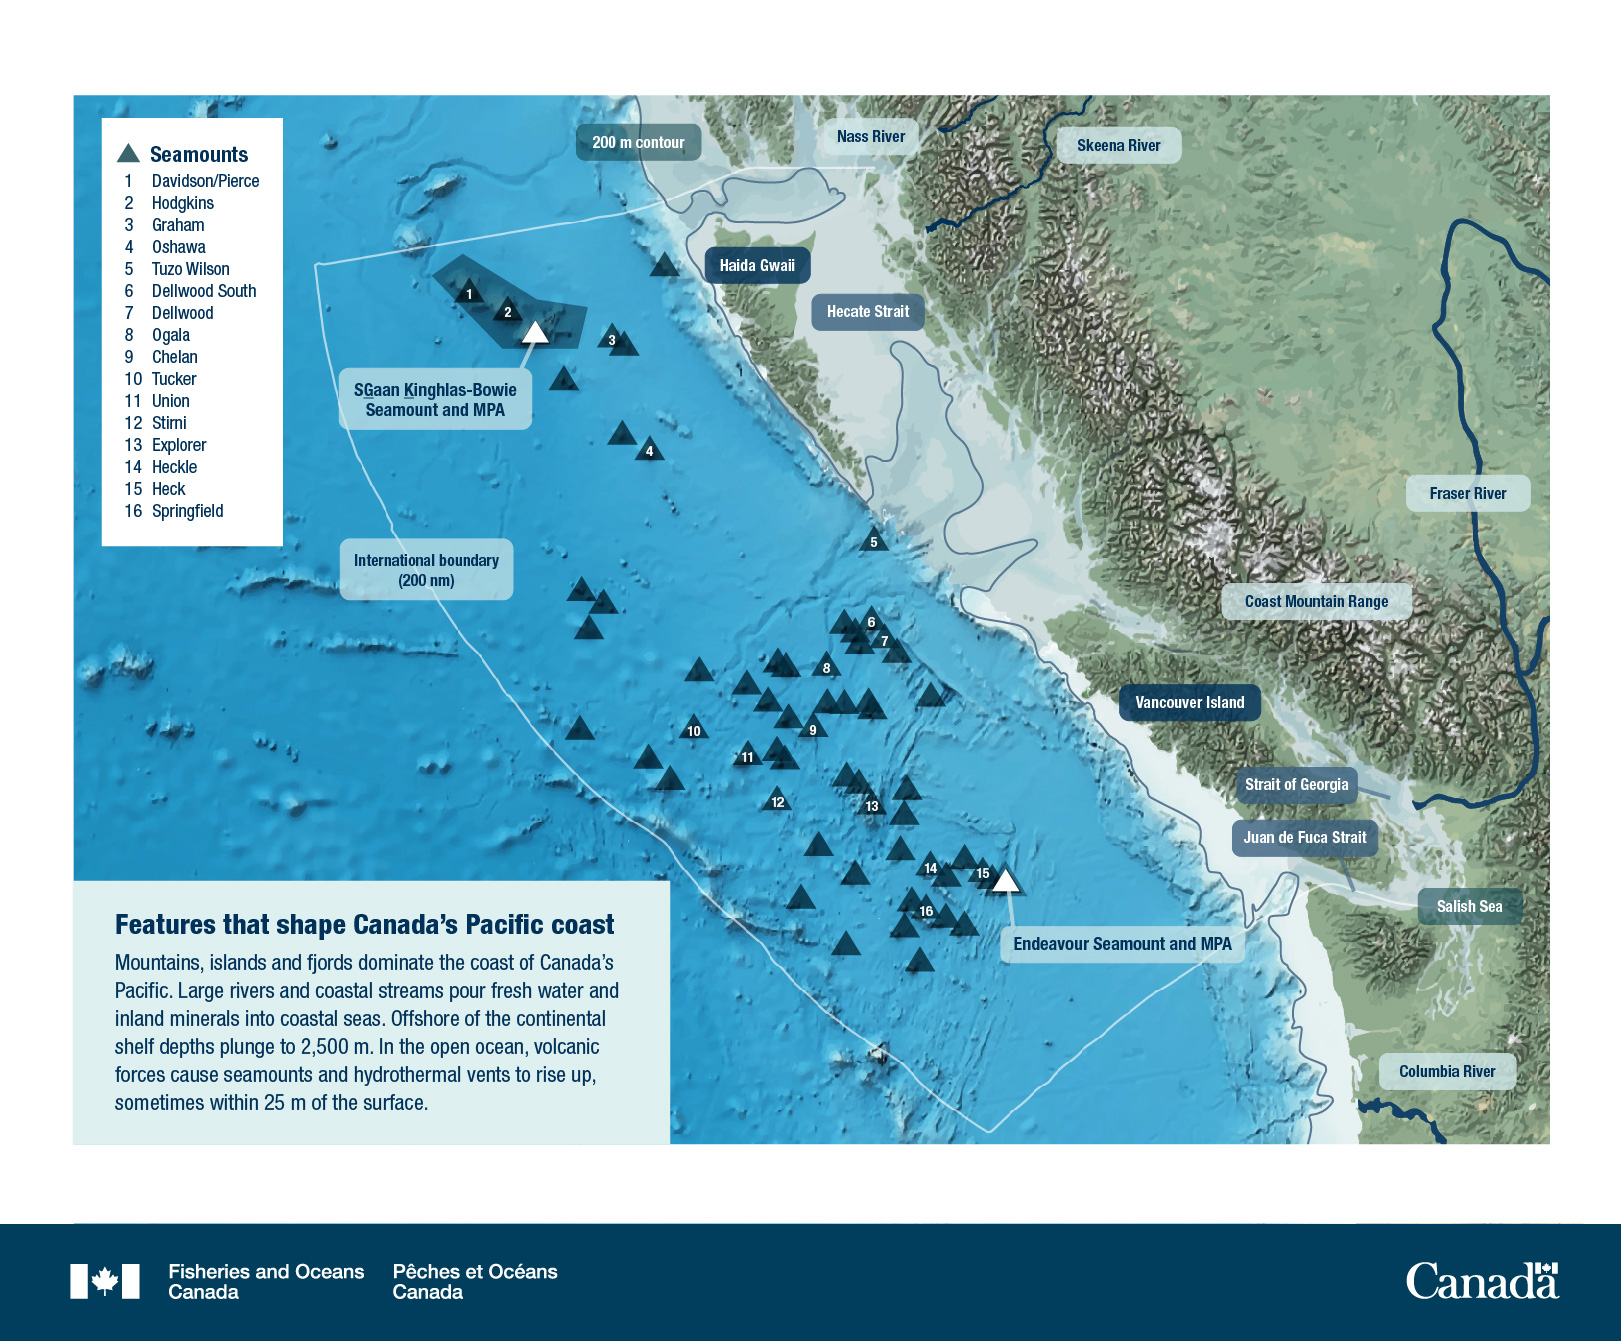 Canada’s Oceans Now, Pacific Ecosystems 2021 - Features that shape Canada’s Pacific coast